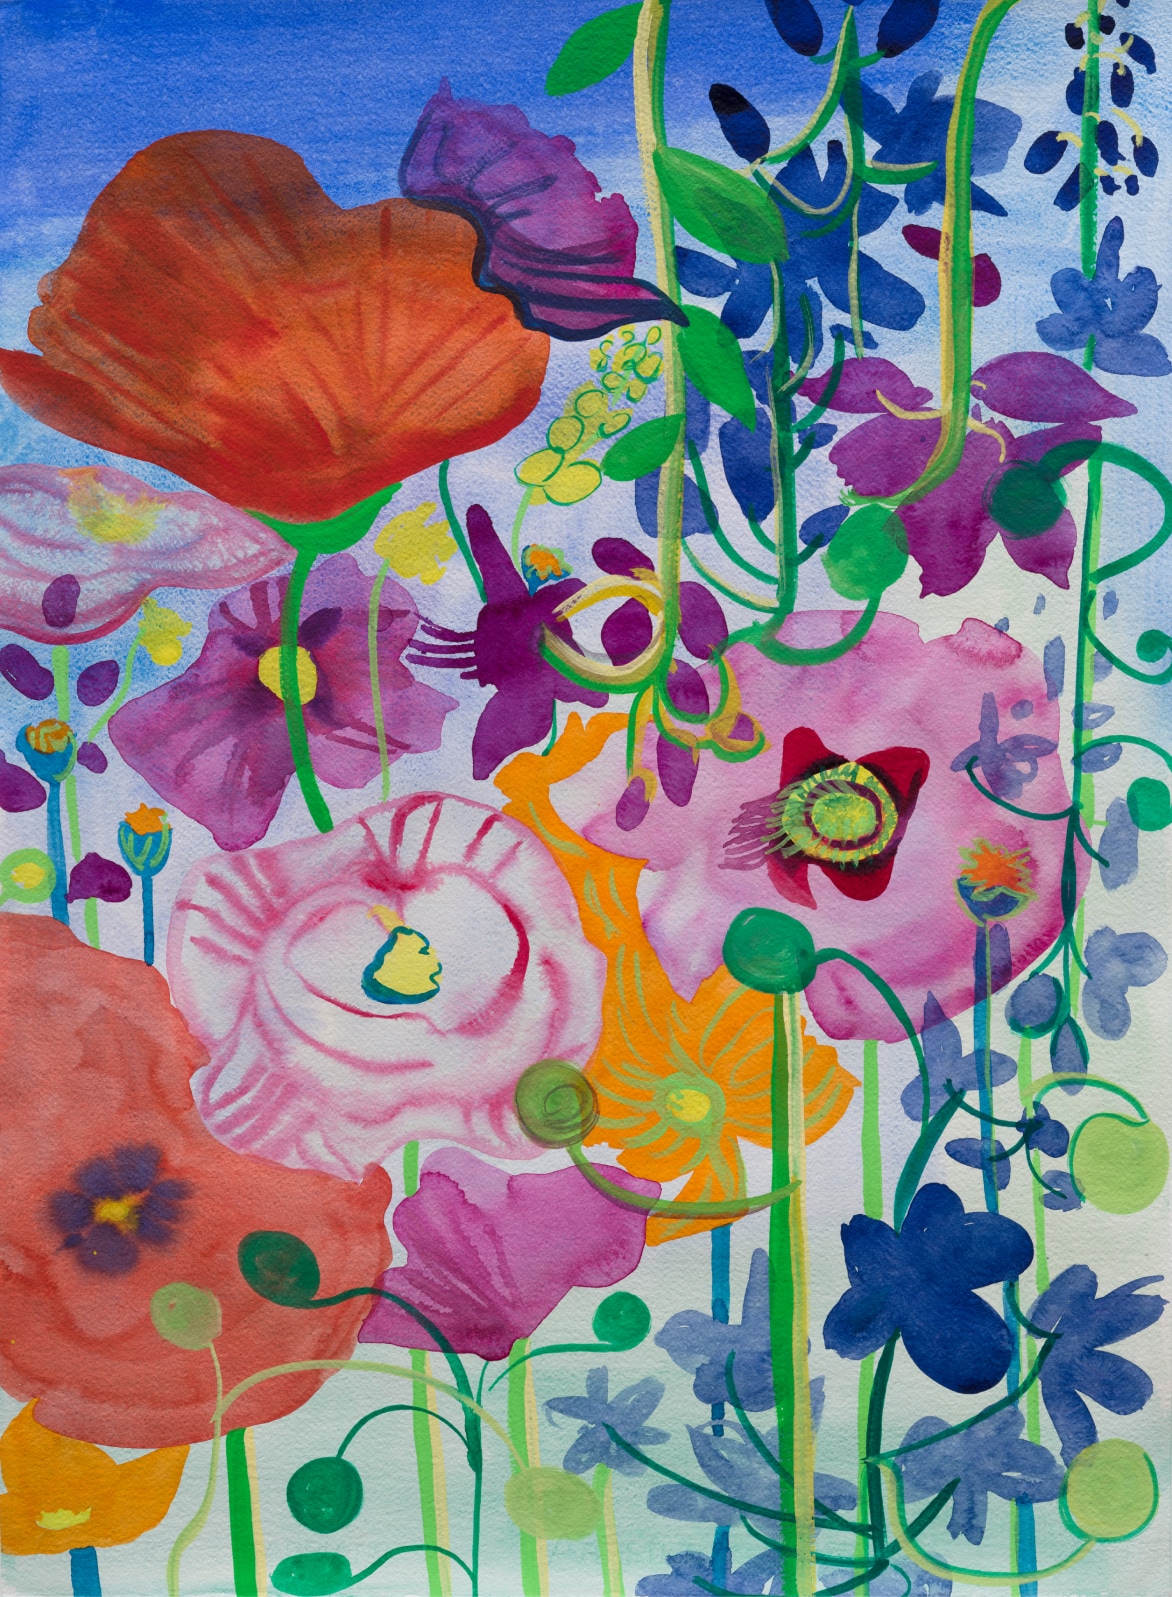 Artwork featuring red, pink, and puple poppy flowers with abstract blooms in the background